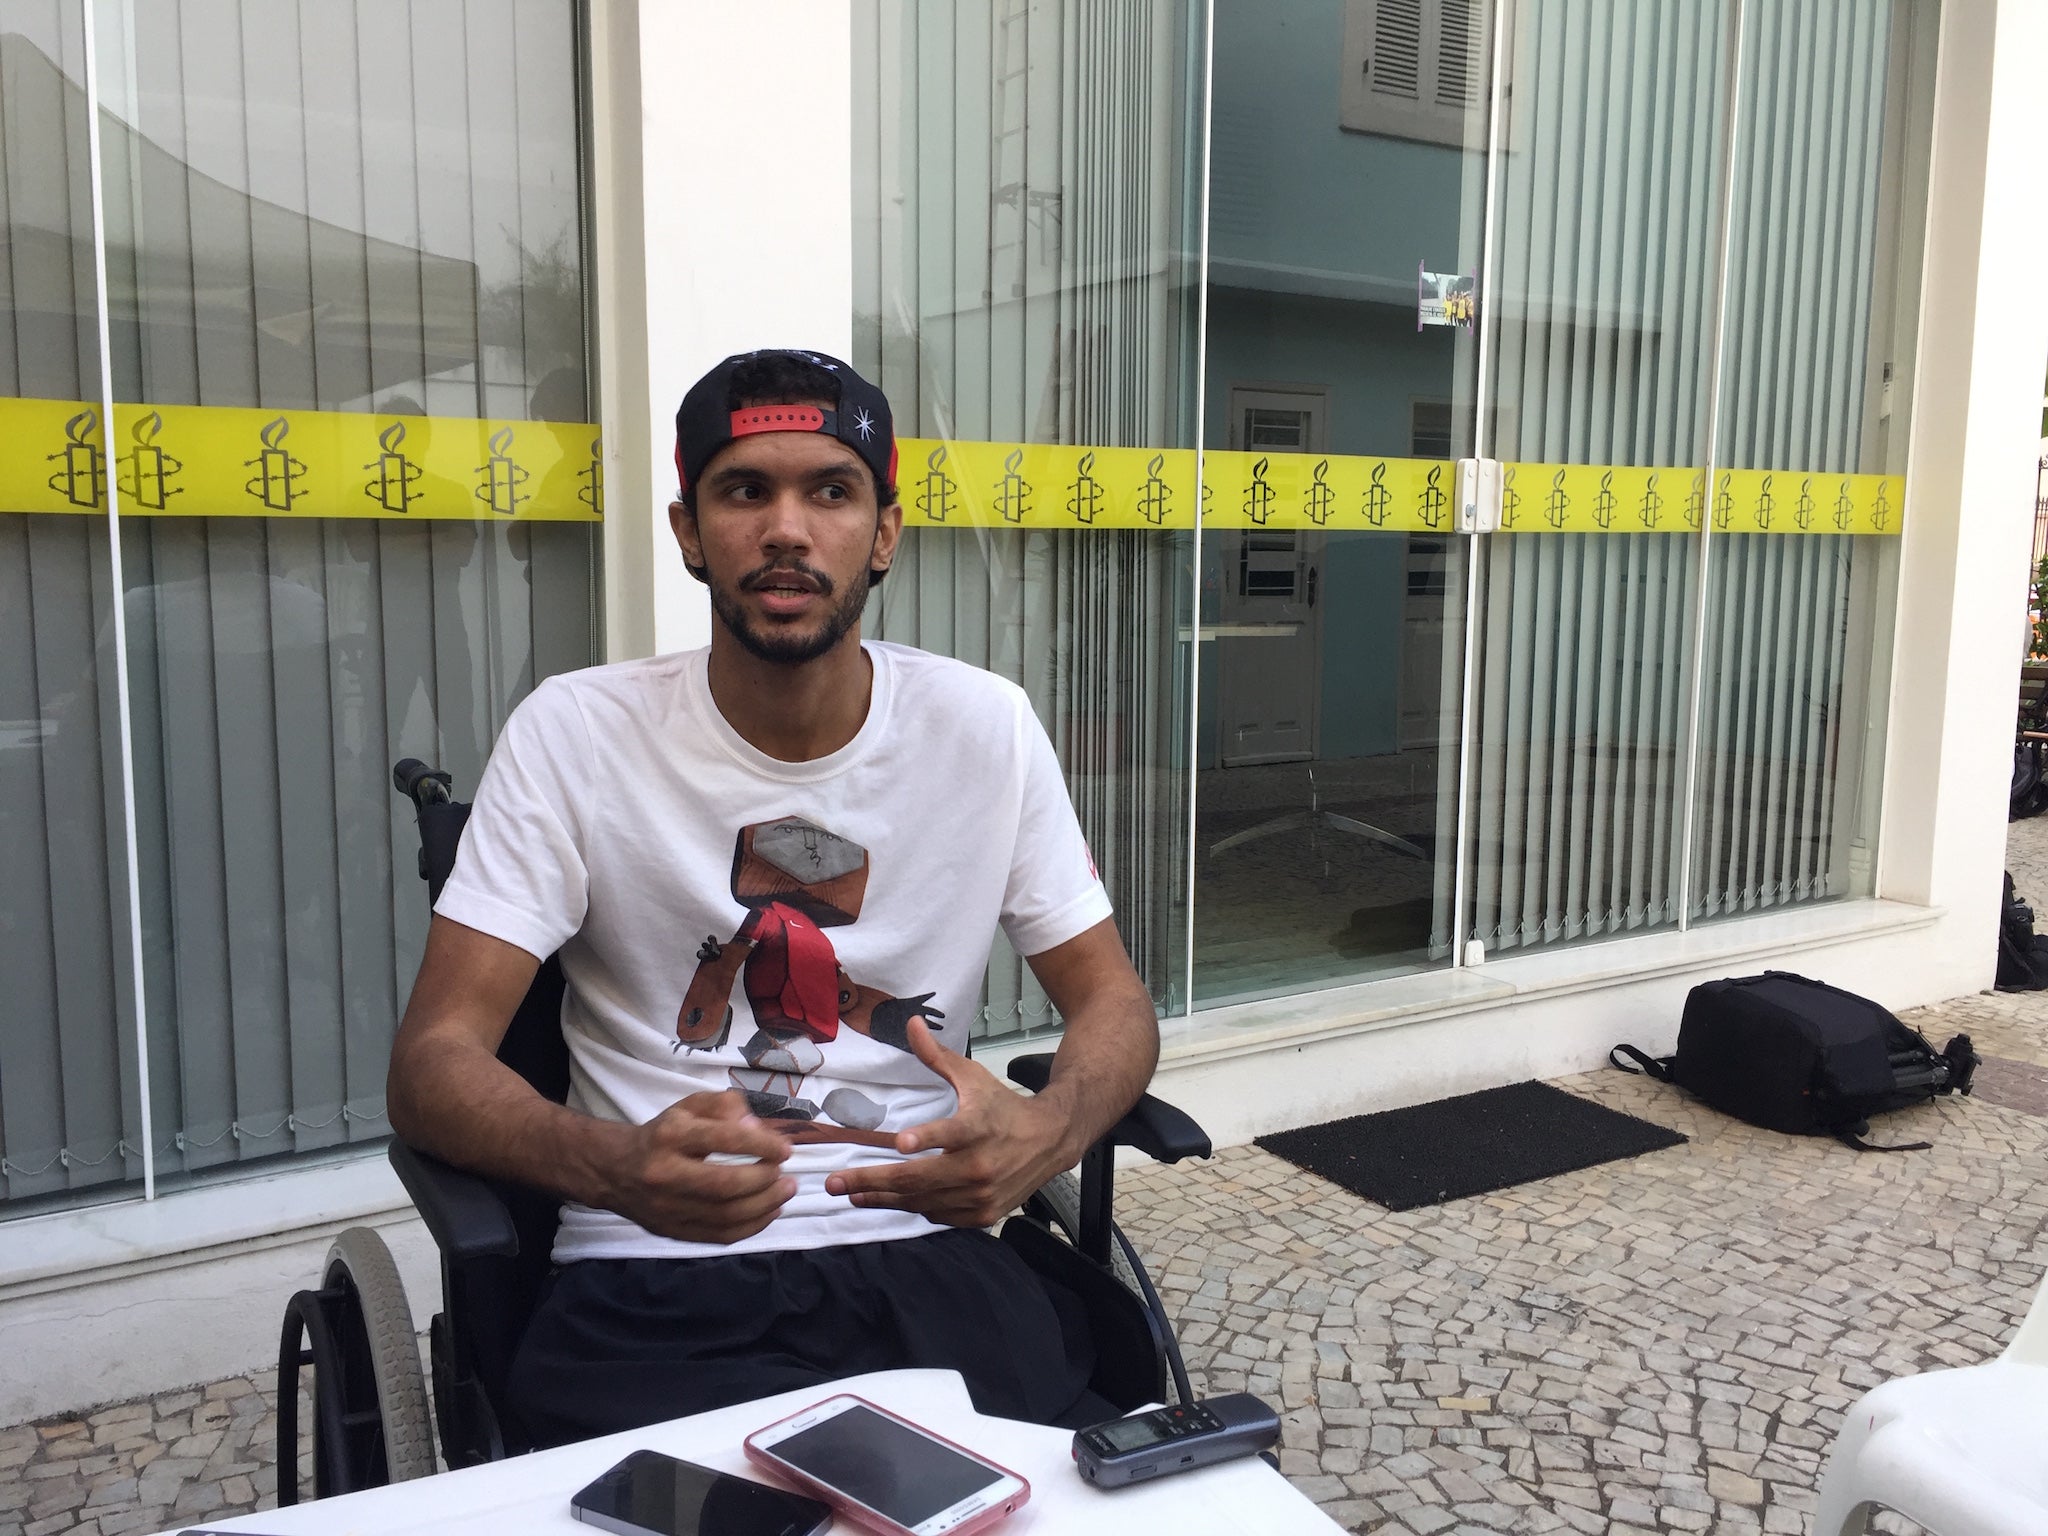 Vitor Santiago speaks to reporters in Rio on the eve of the Olympics (Amnesty International)